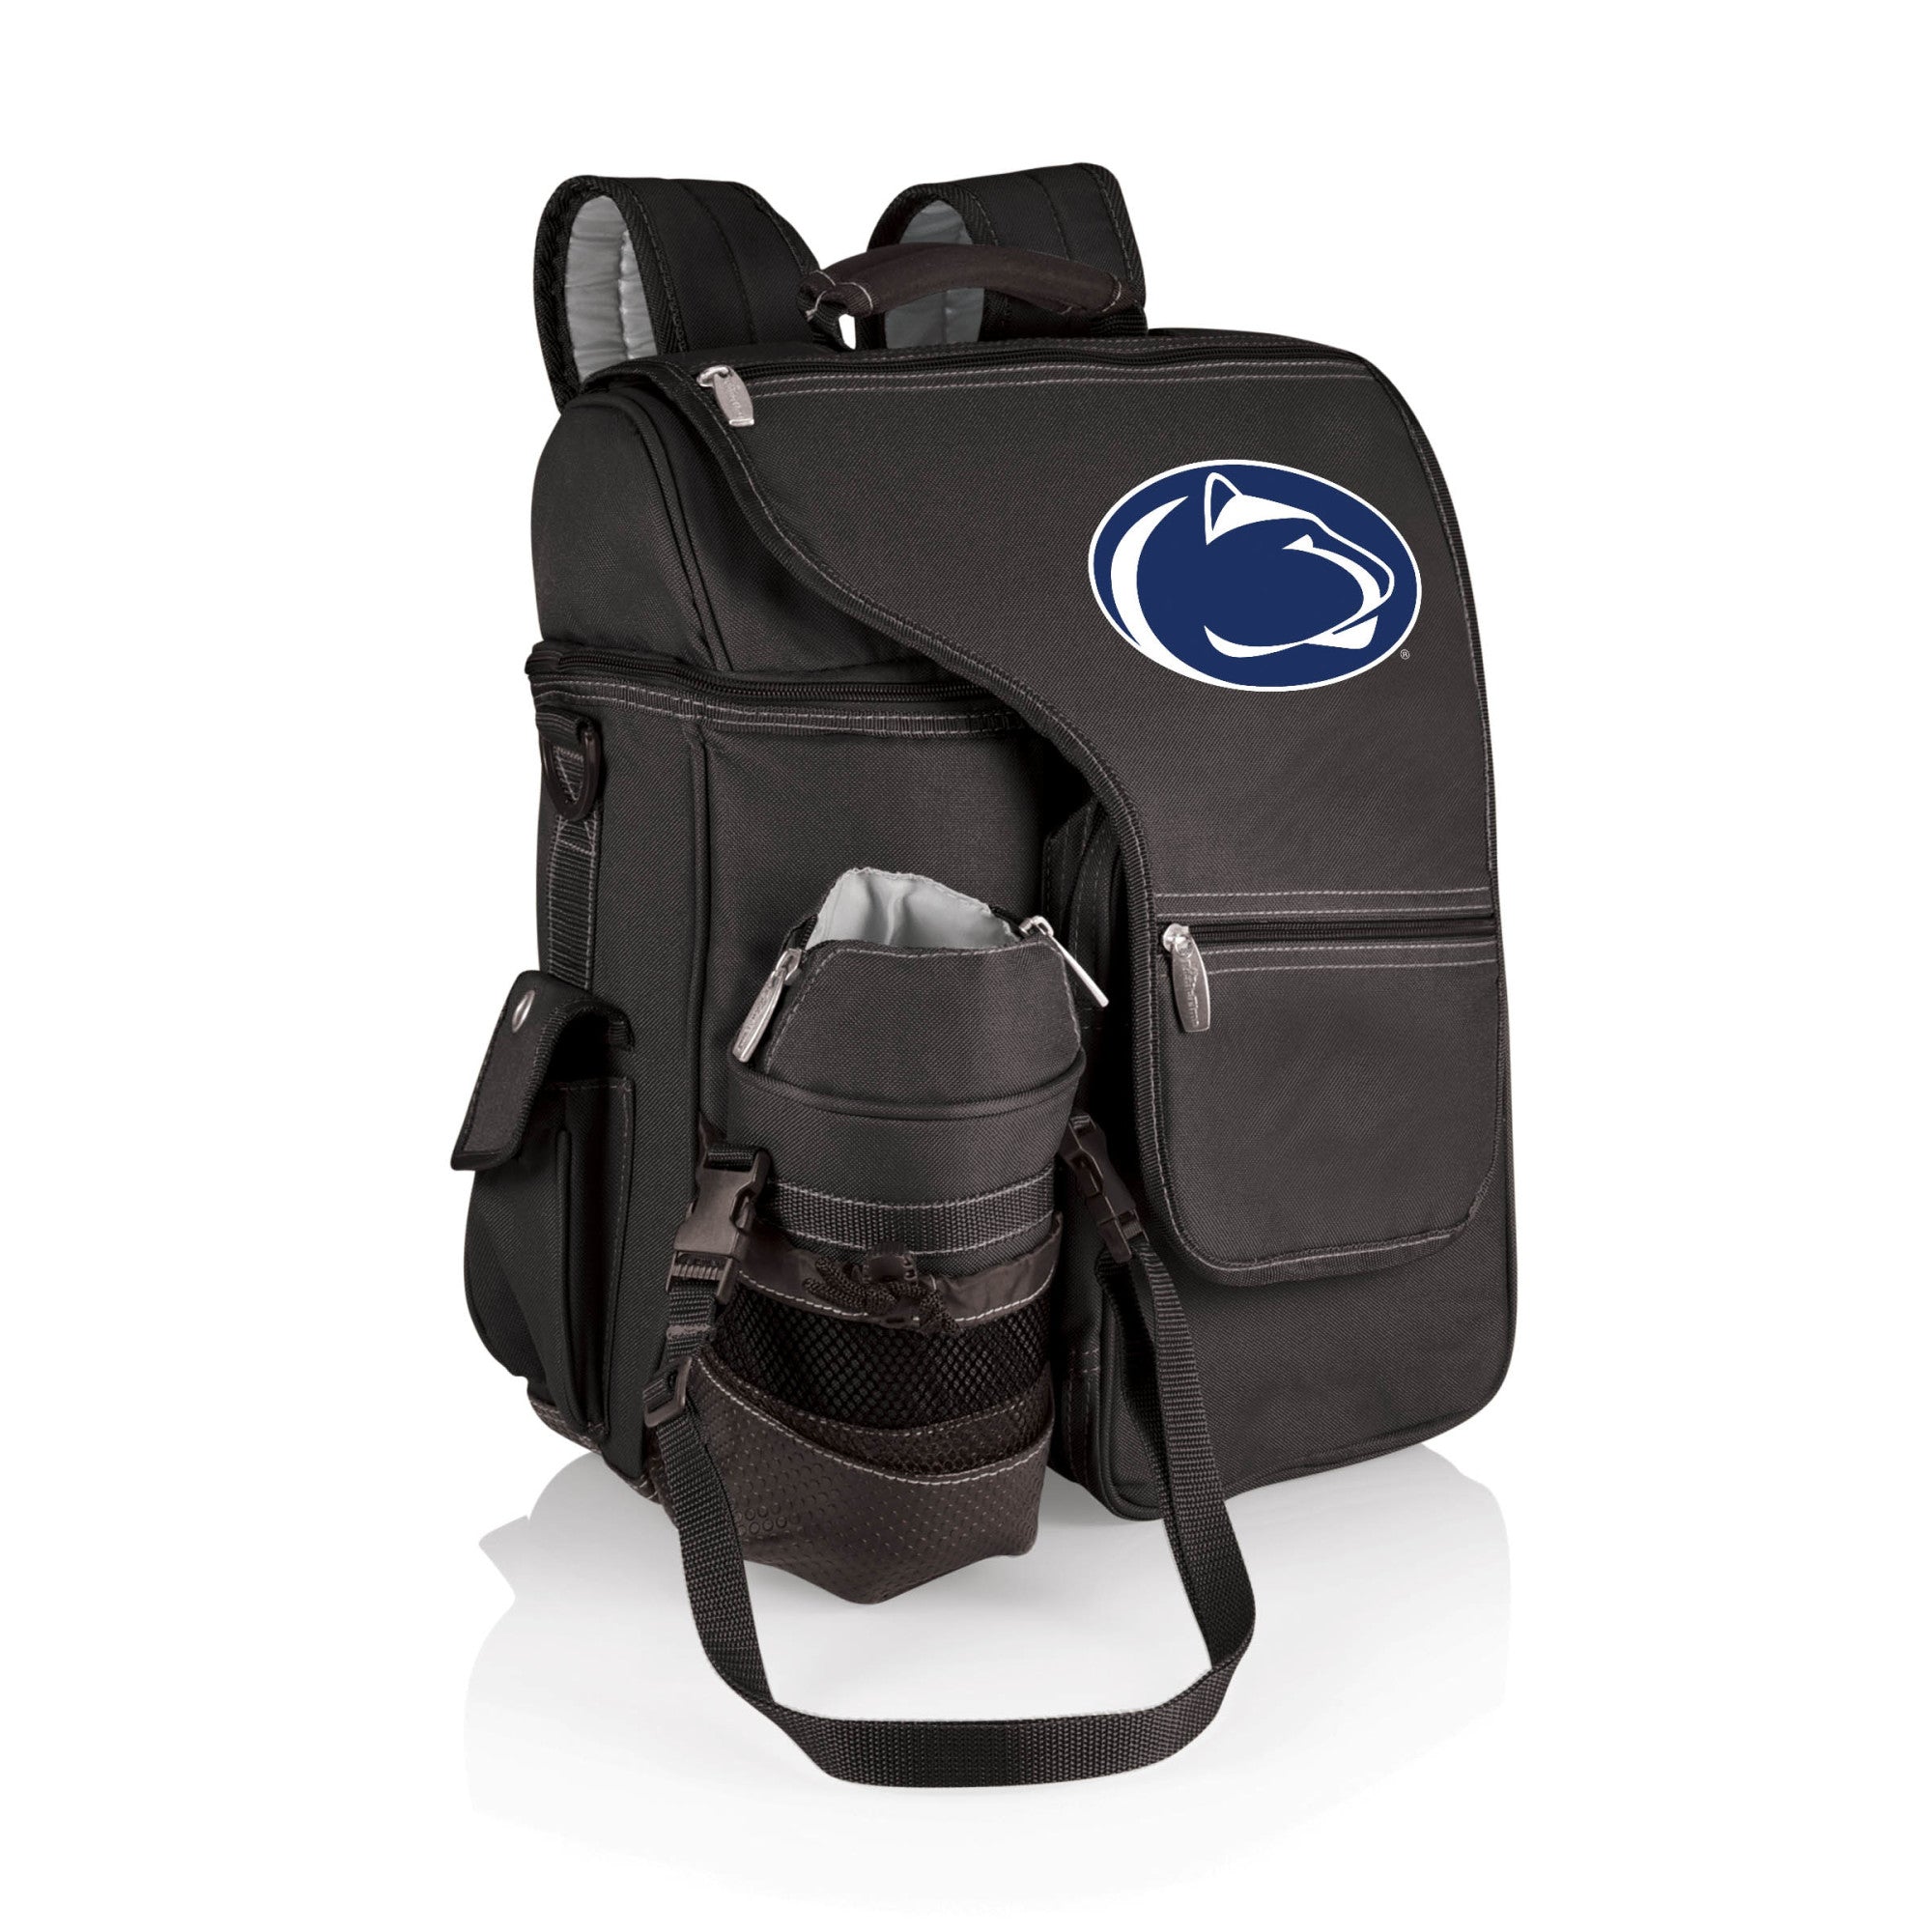 Penn State Nittany Lions - Turismo Travel Backpack Cooler